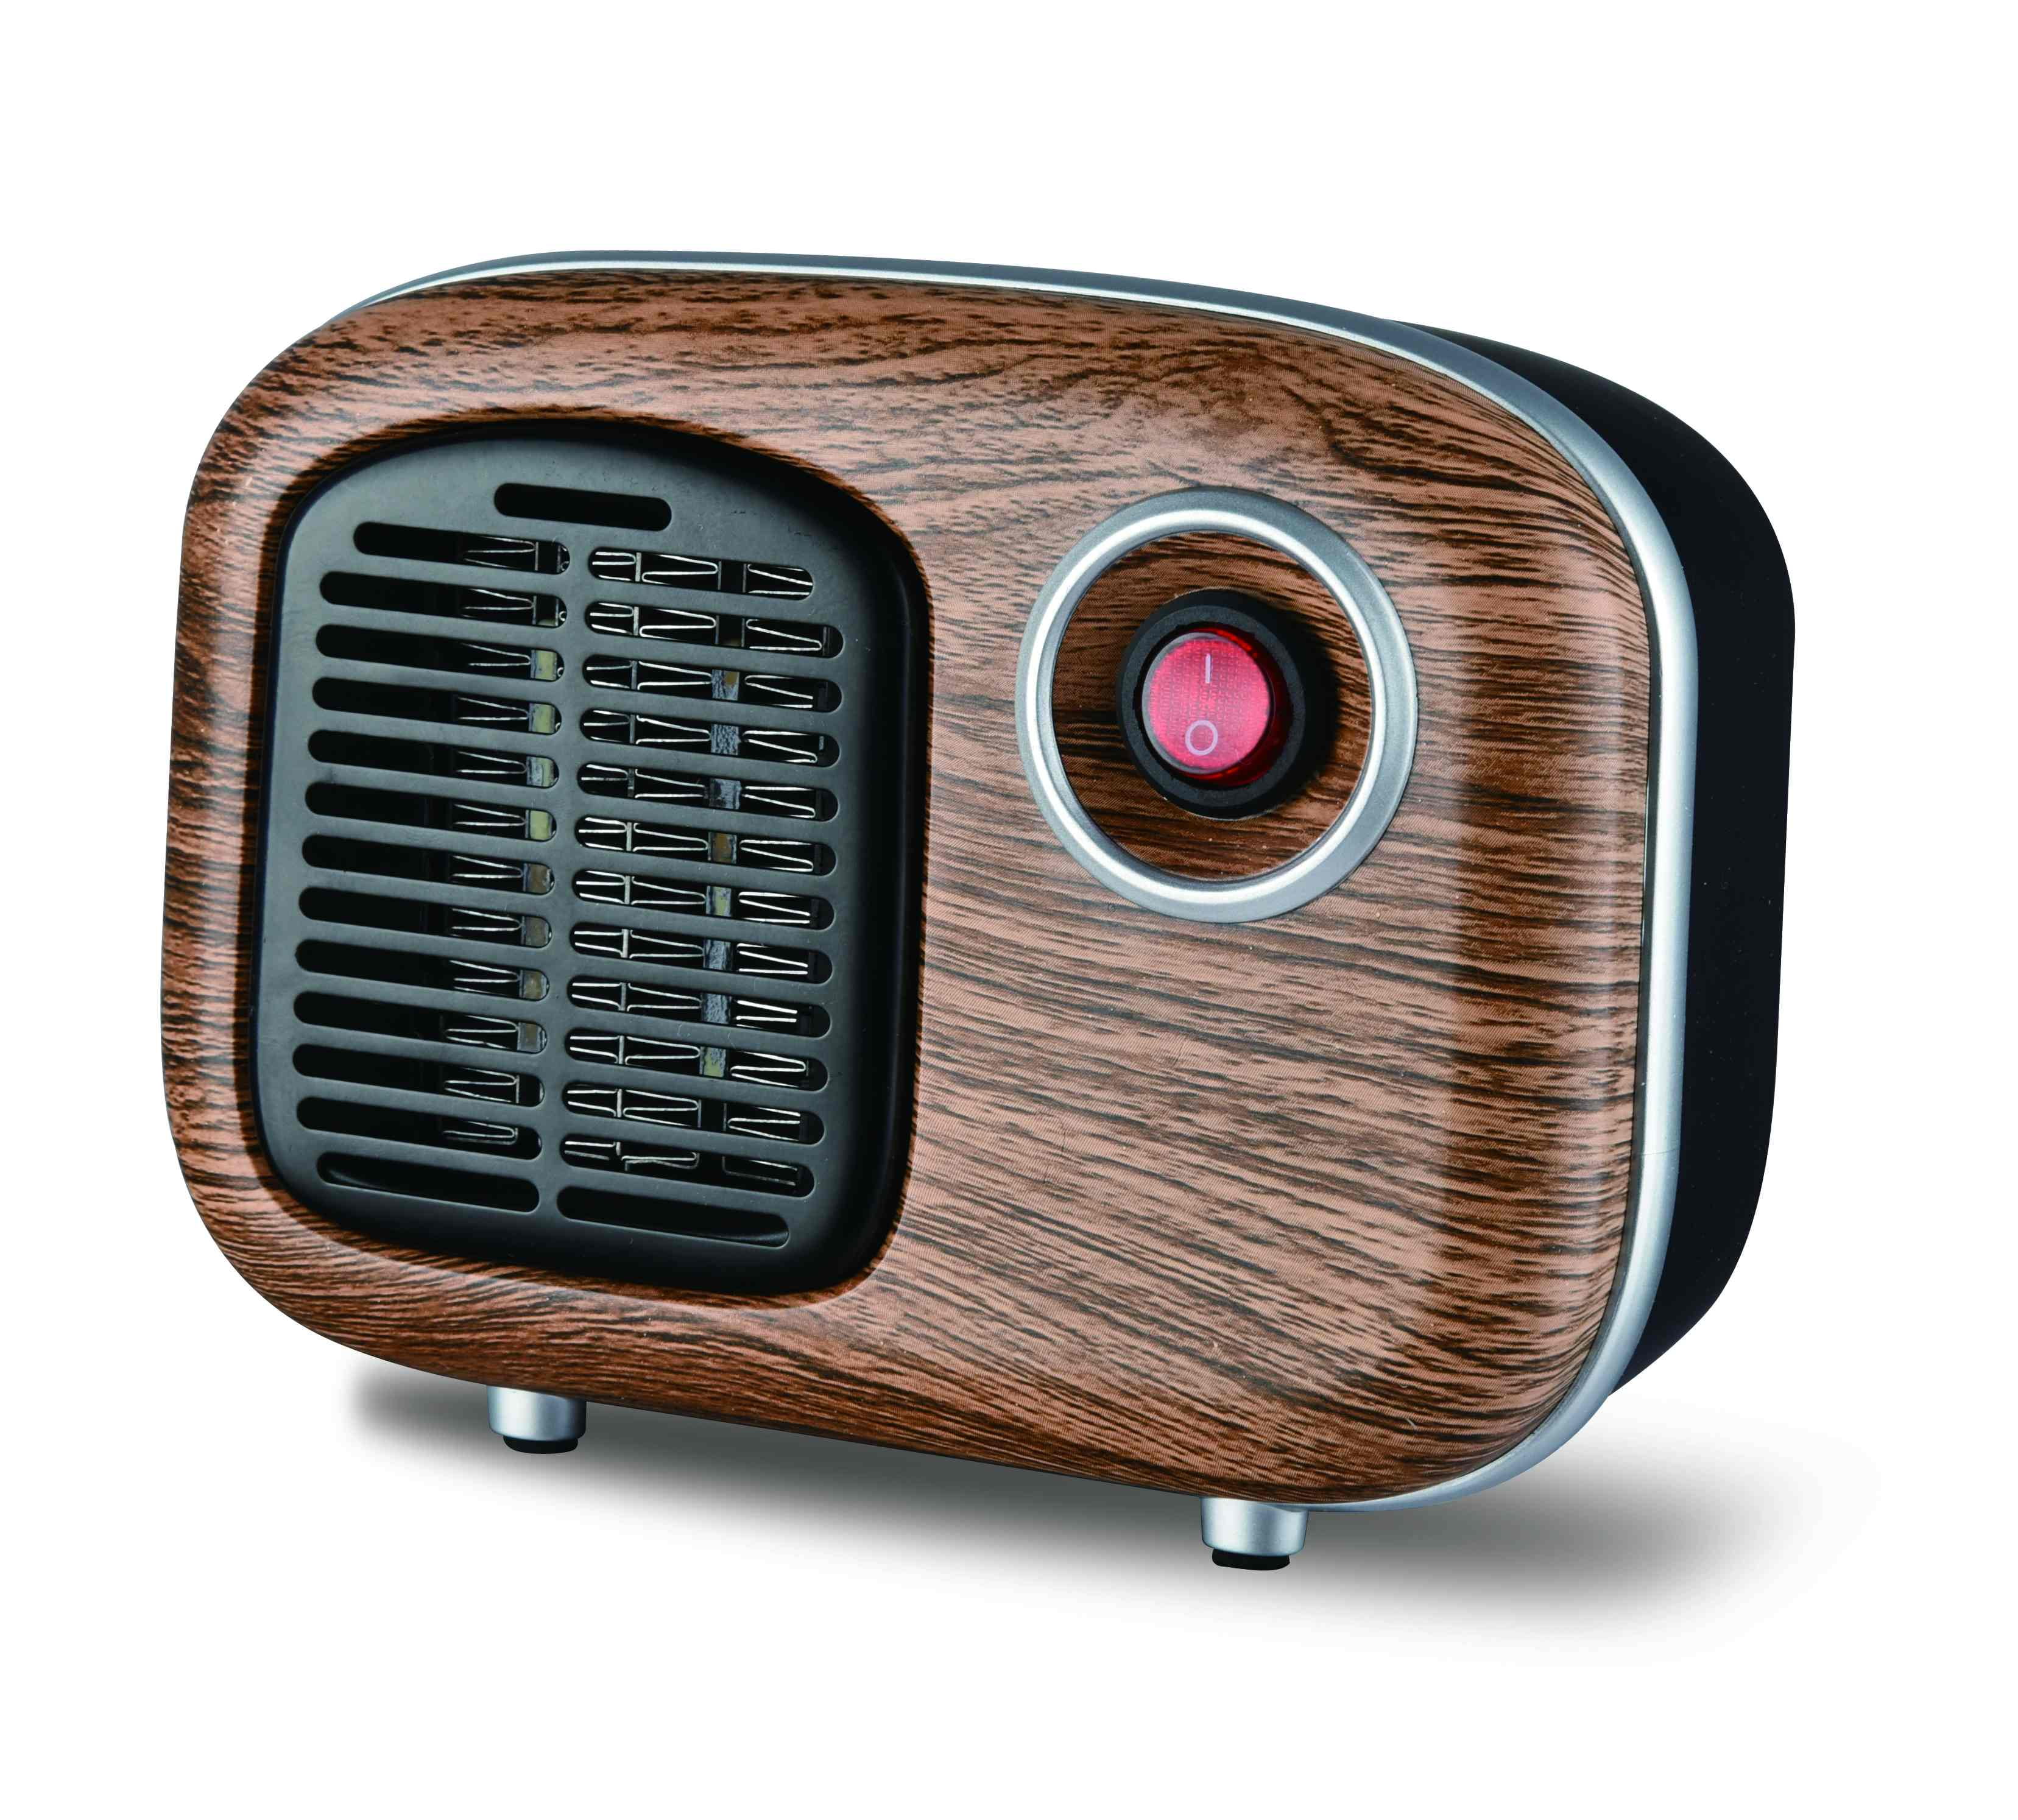 Details about   Soleil Personal Ceramic Mini Heater 250W Indoor Model MH-08 MULTIPLE COLORS